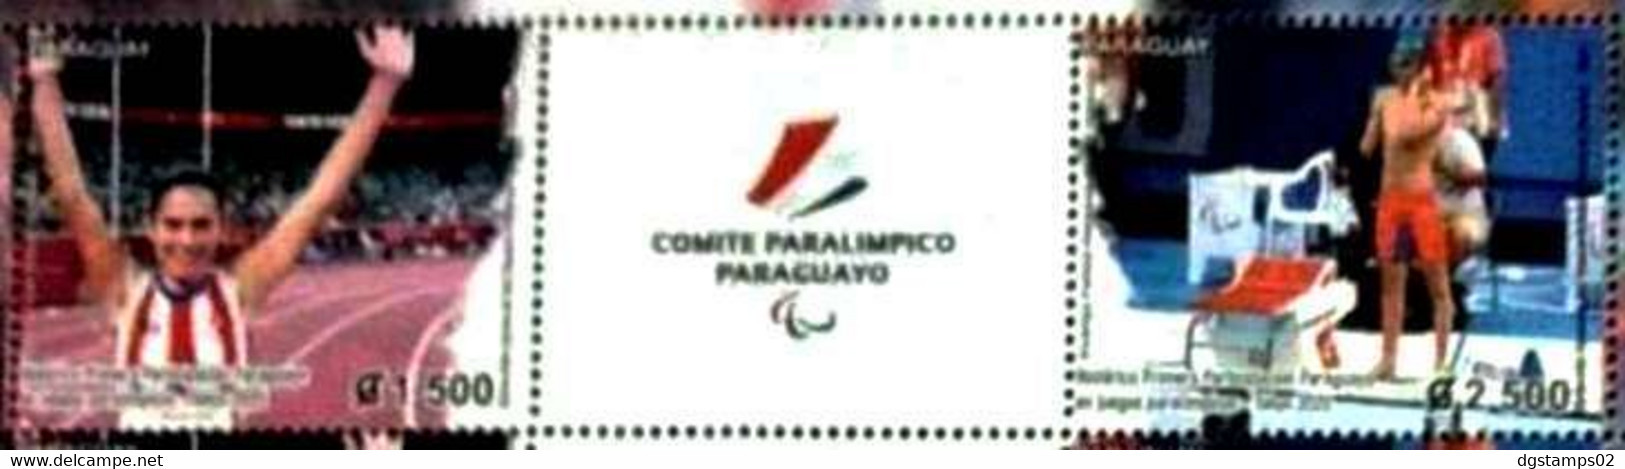 Paraguay 2022 ** History Of Participation In Paralympic Games: Athletics And Swimming. - Verano 2020 : Tokio